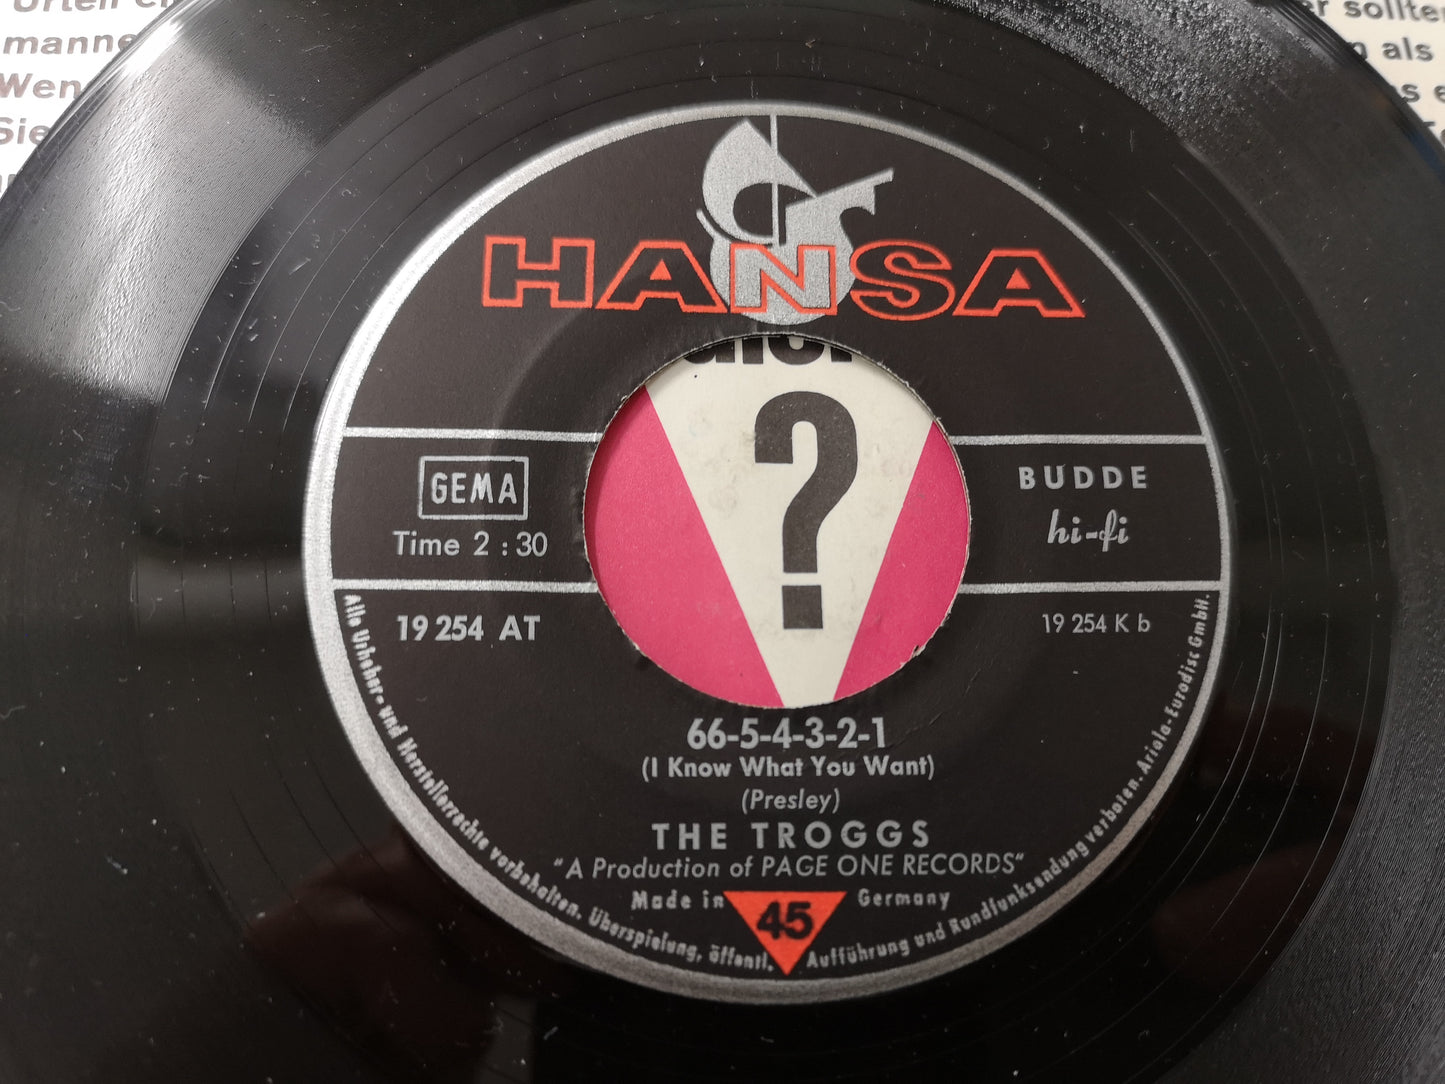 Troggs "Any Way That You Want Me" Orig Germany 1967 VG++/EX (7" Single)